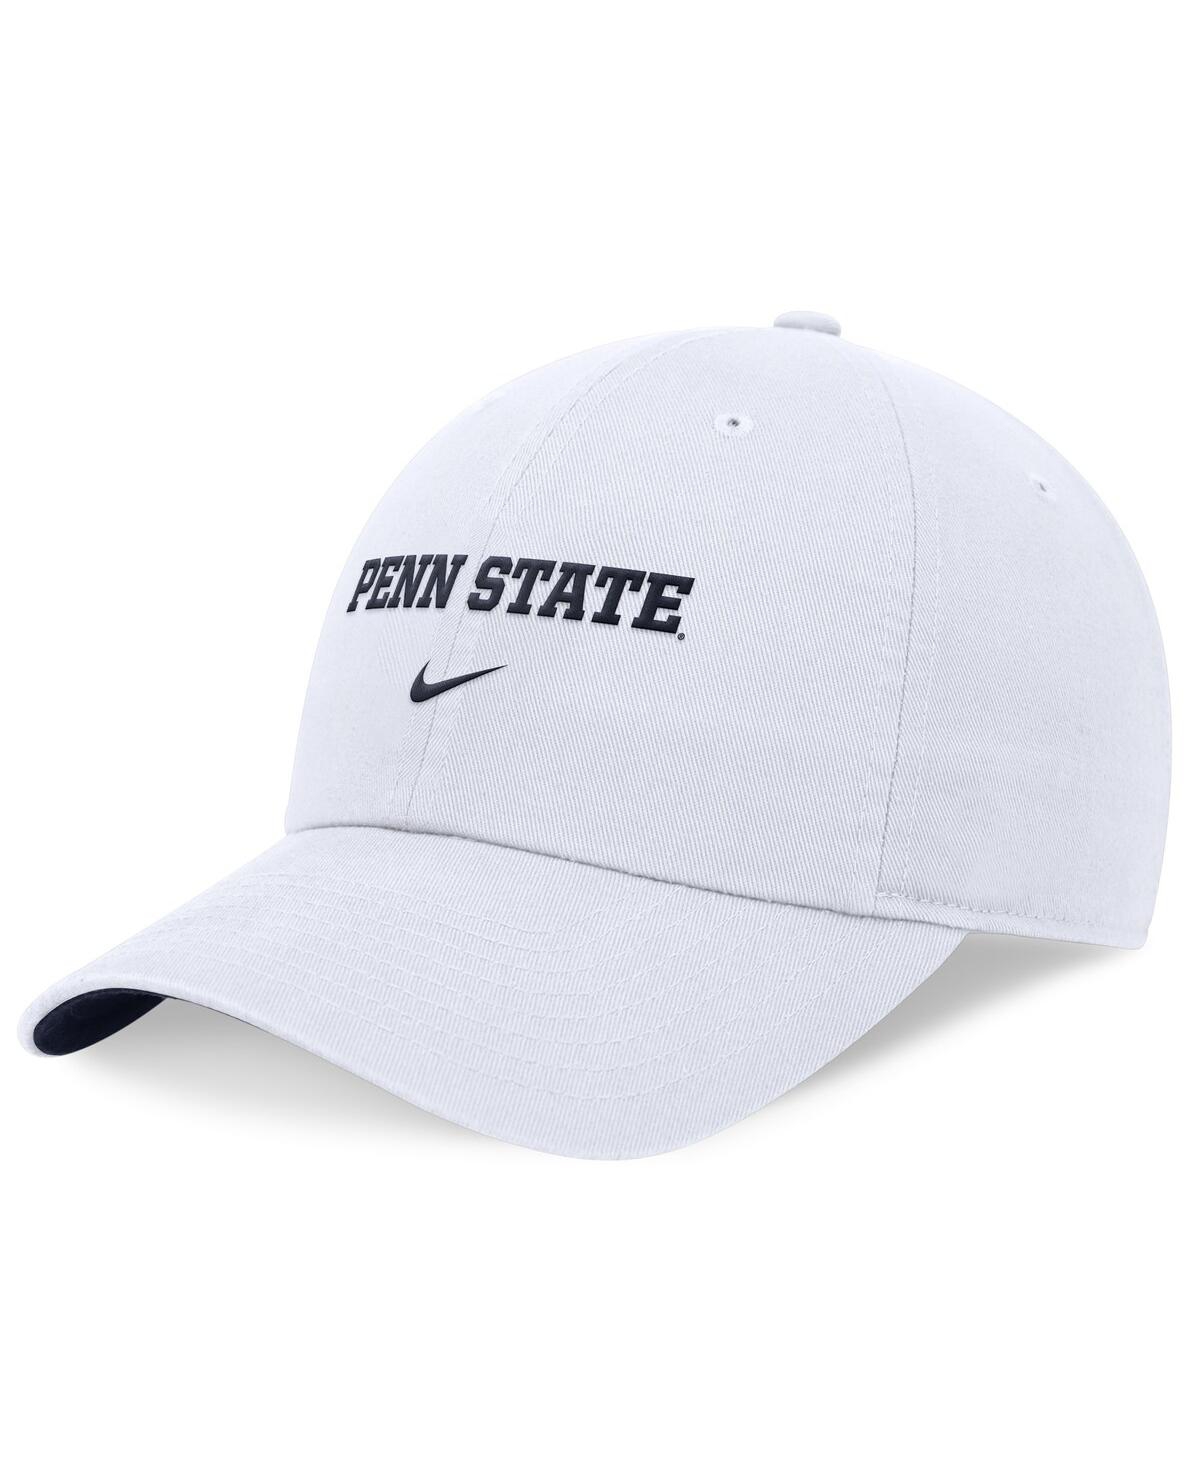 Men's and Women's White Penn State Nittany Lions 2024 Sideline Club Adjustable Hat - White